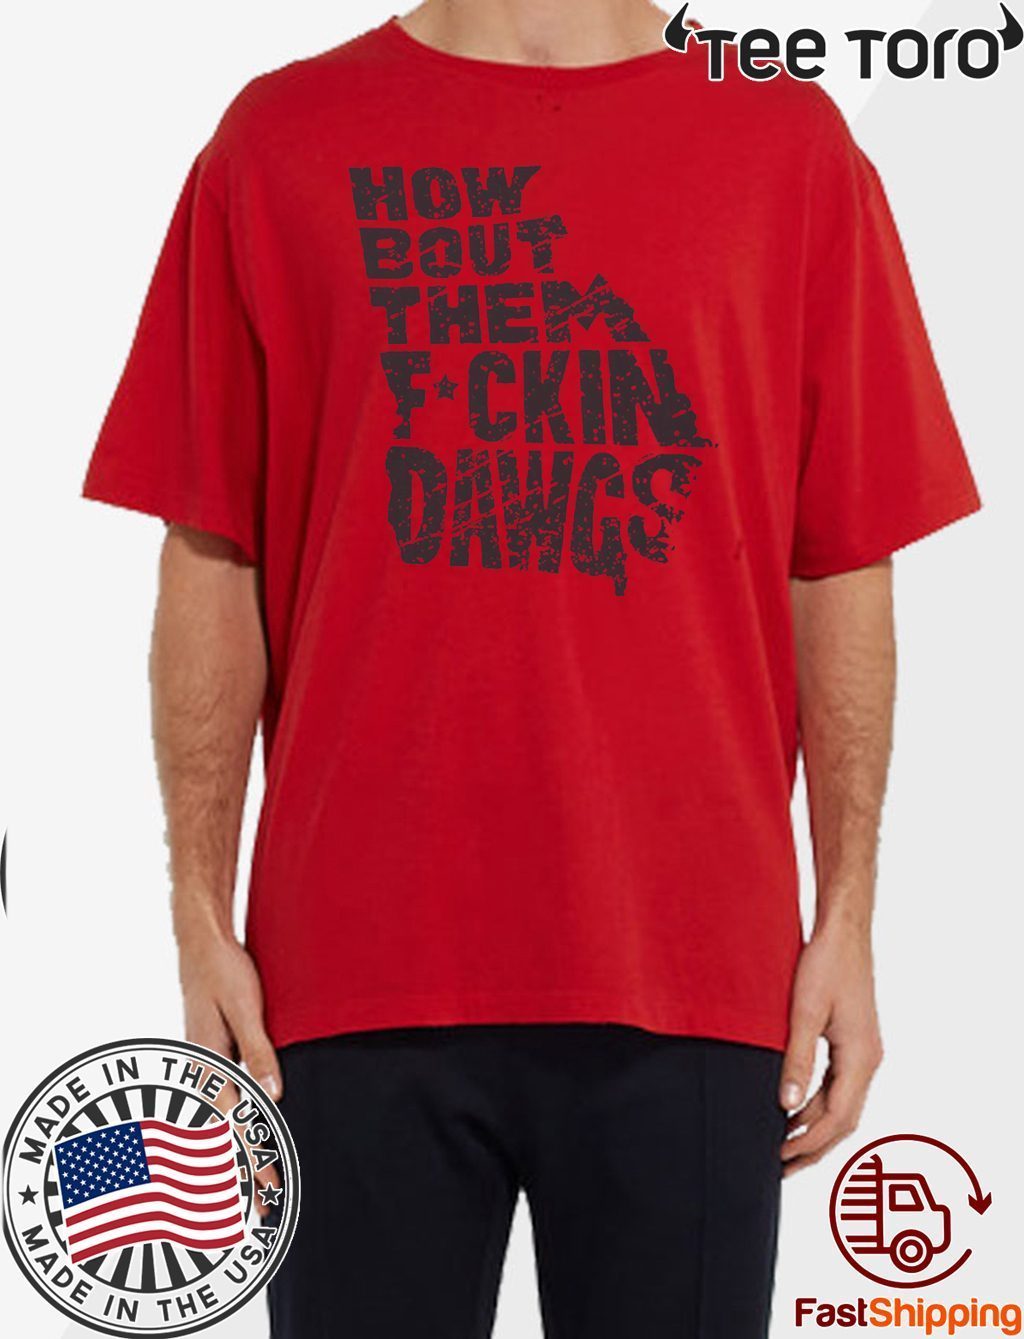 How Bout Them Fuckin Dawgs Shirt Offcie Tee Reviewstees